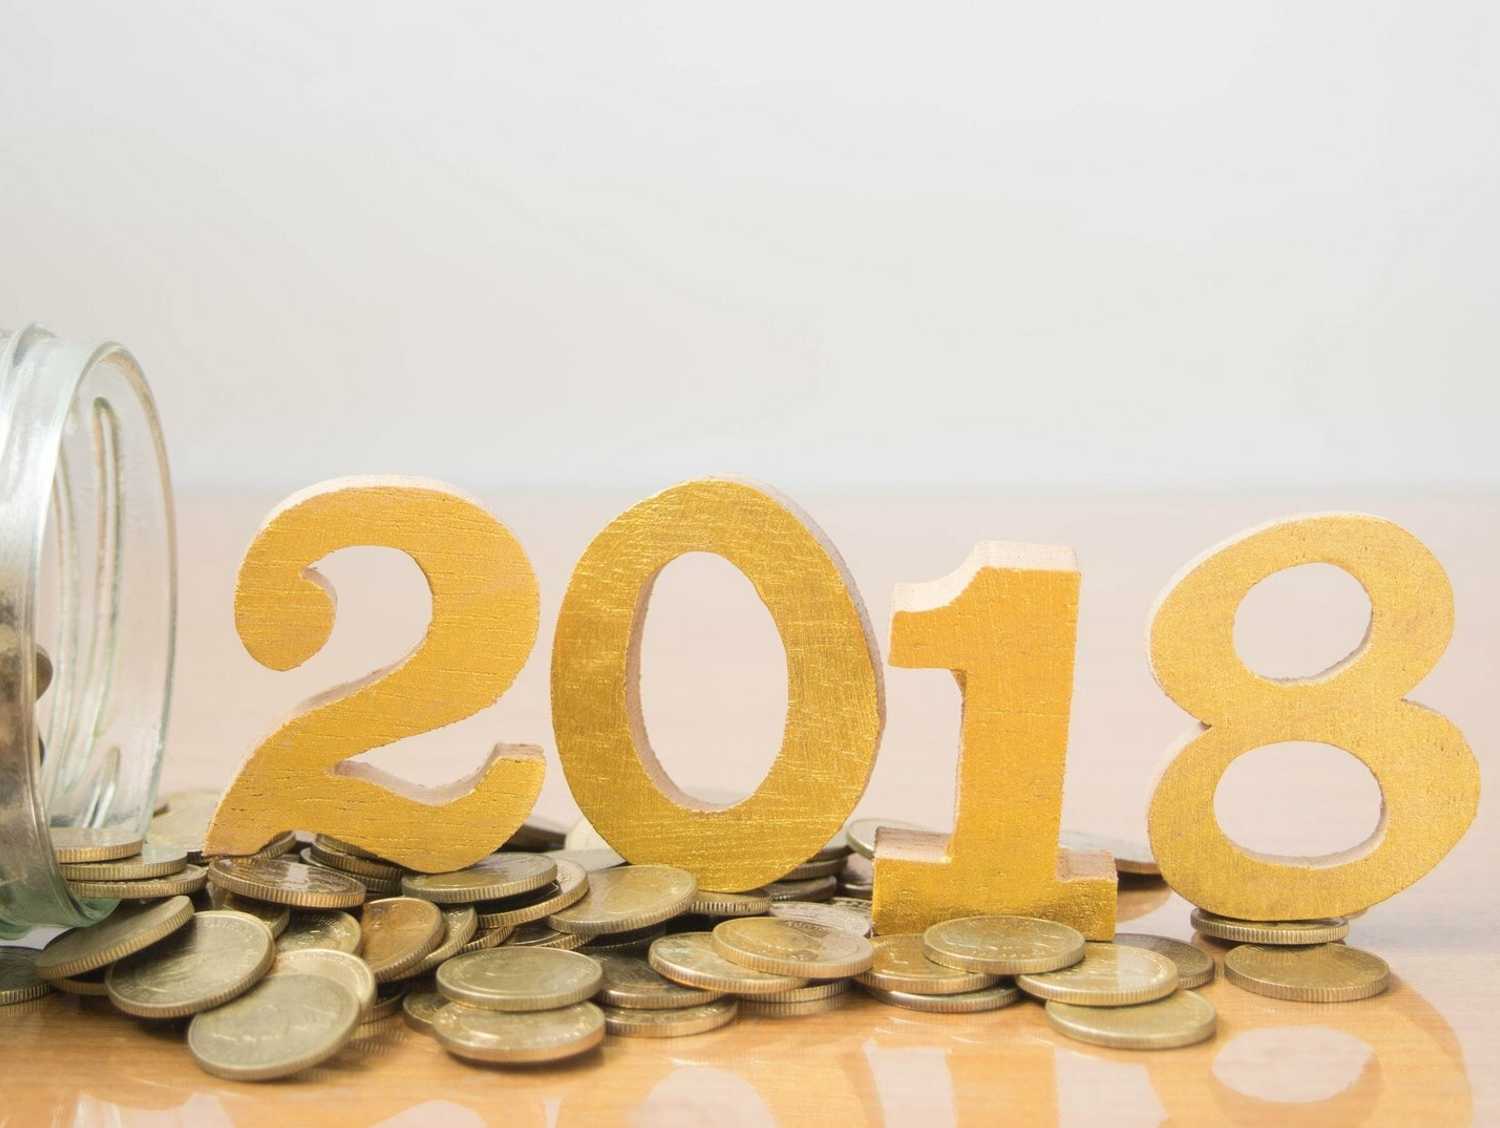 12 Financial Resolutions For The New Year